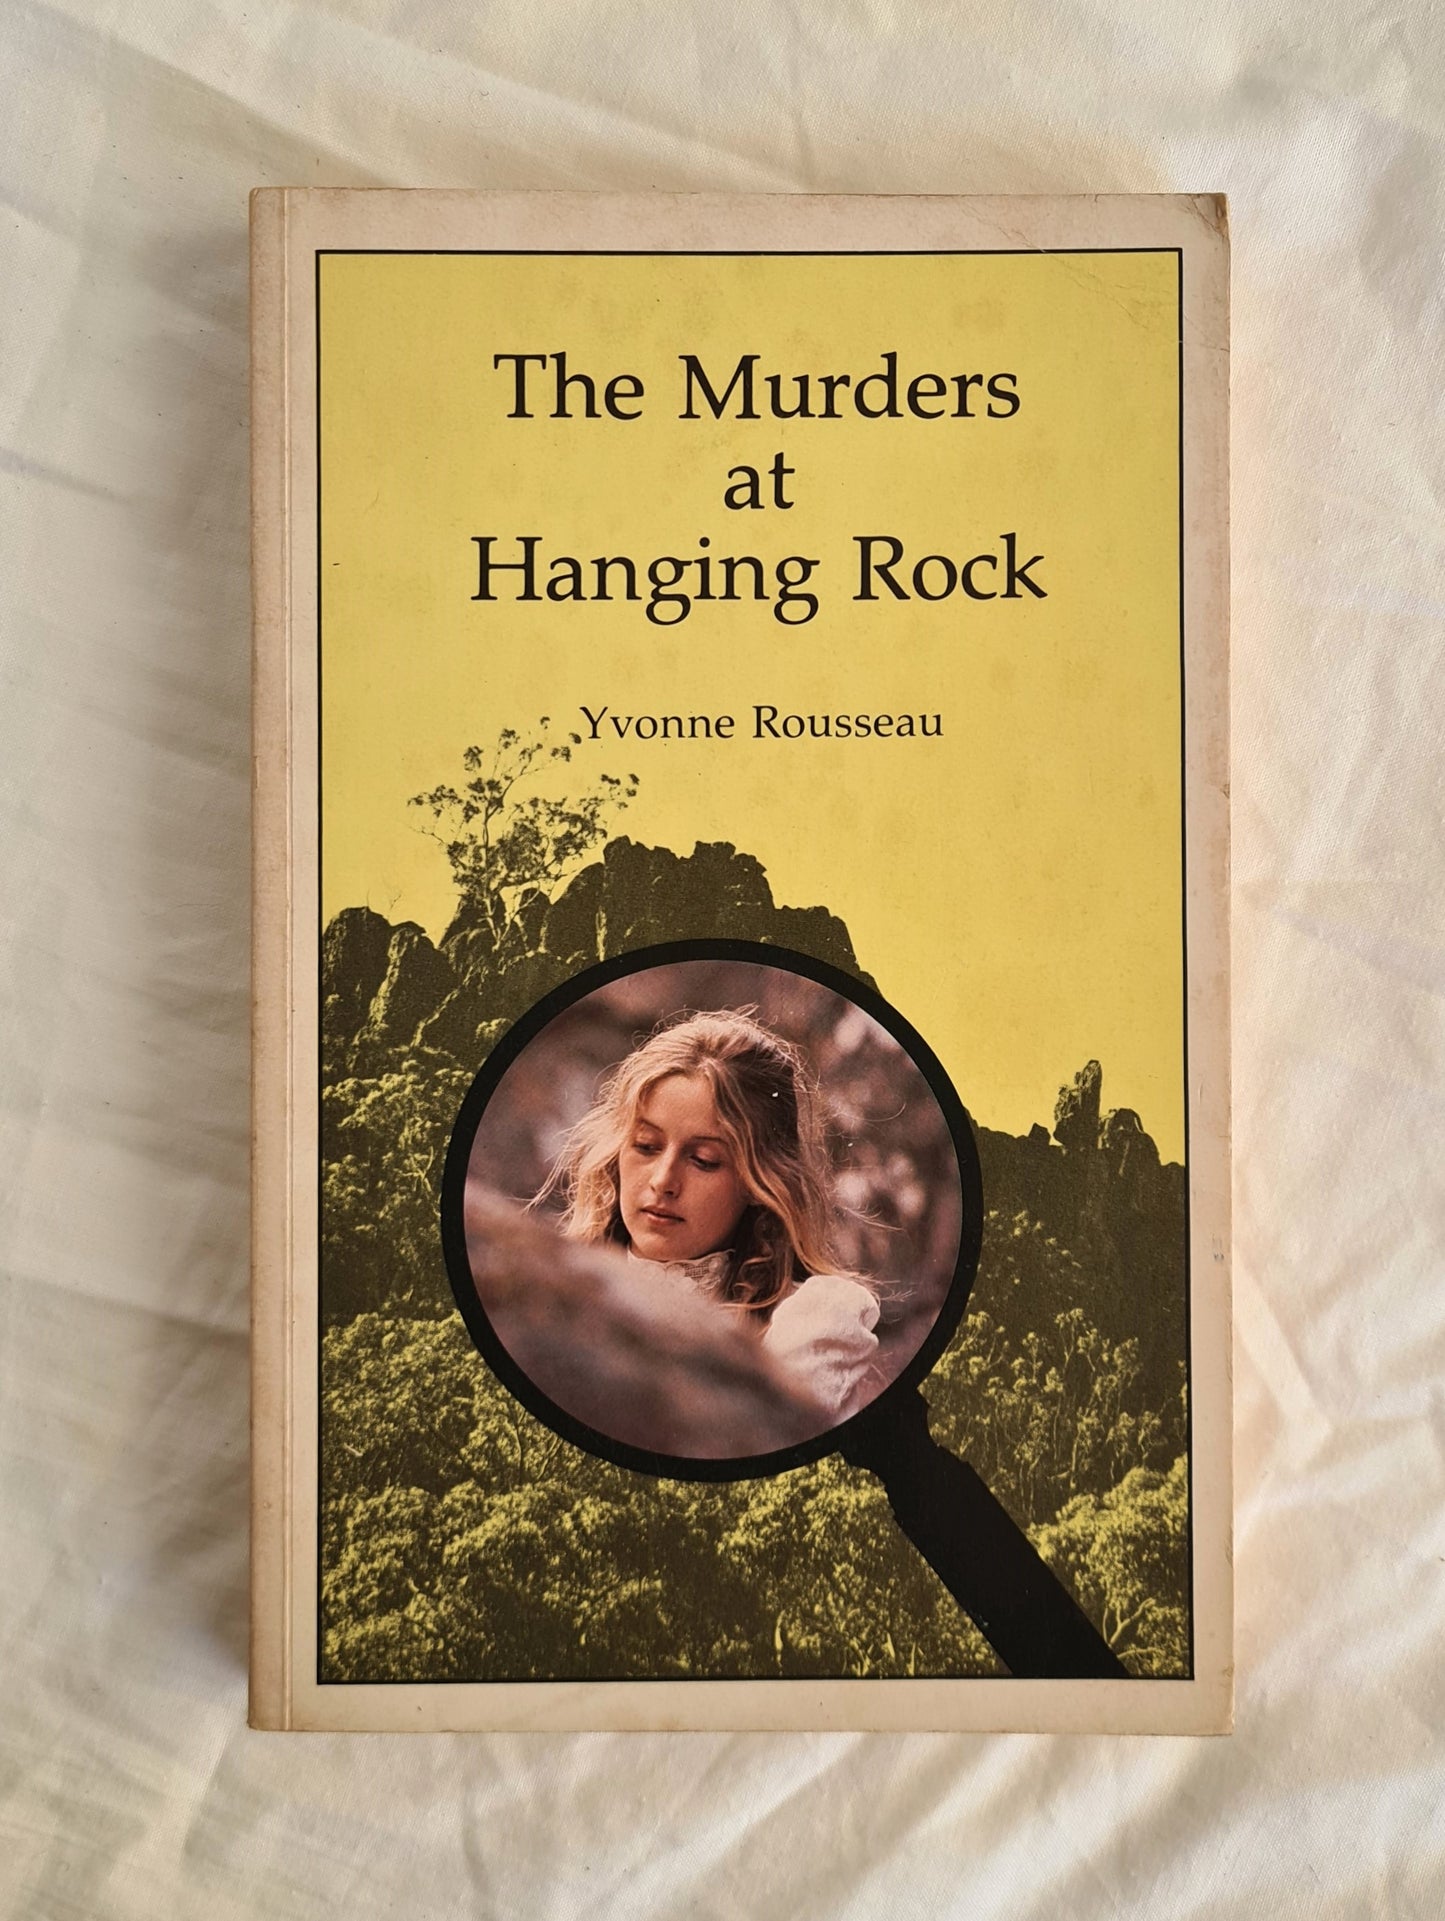 The Murders at Hanging Rock by Yvonne Rousseau